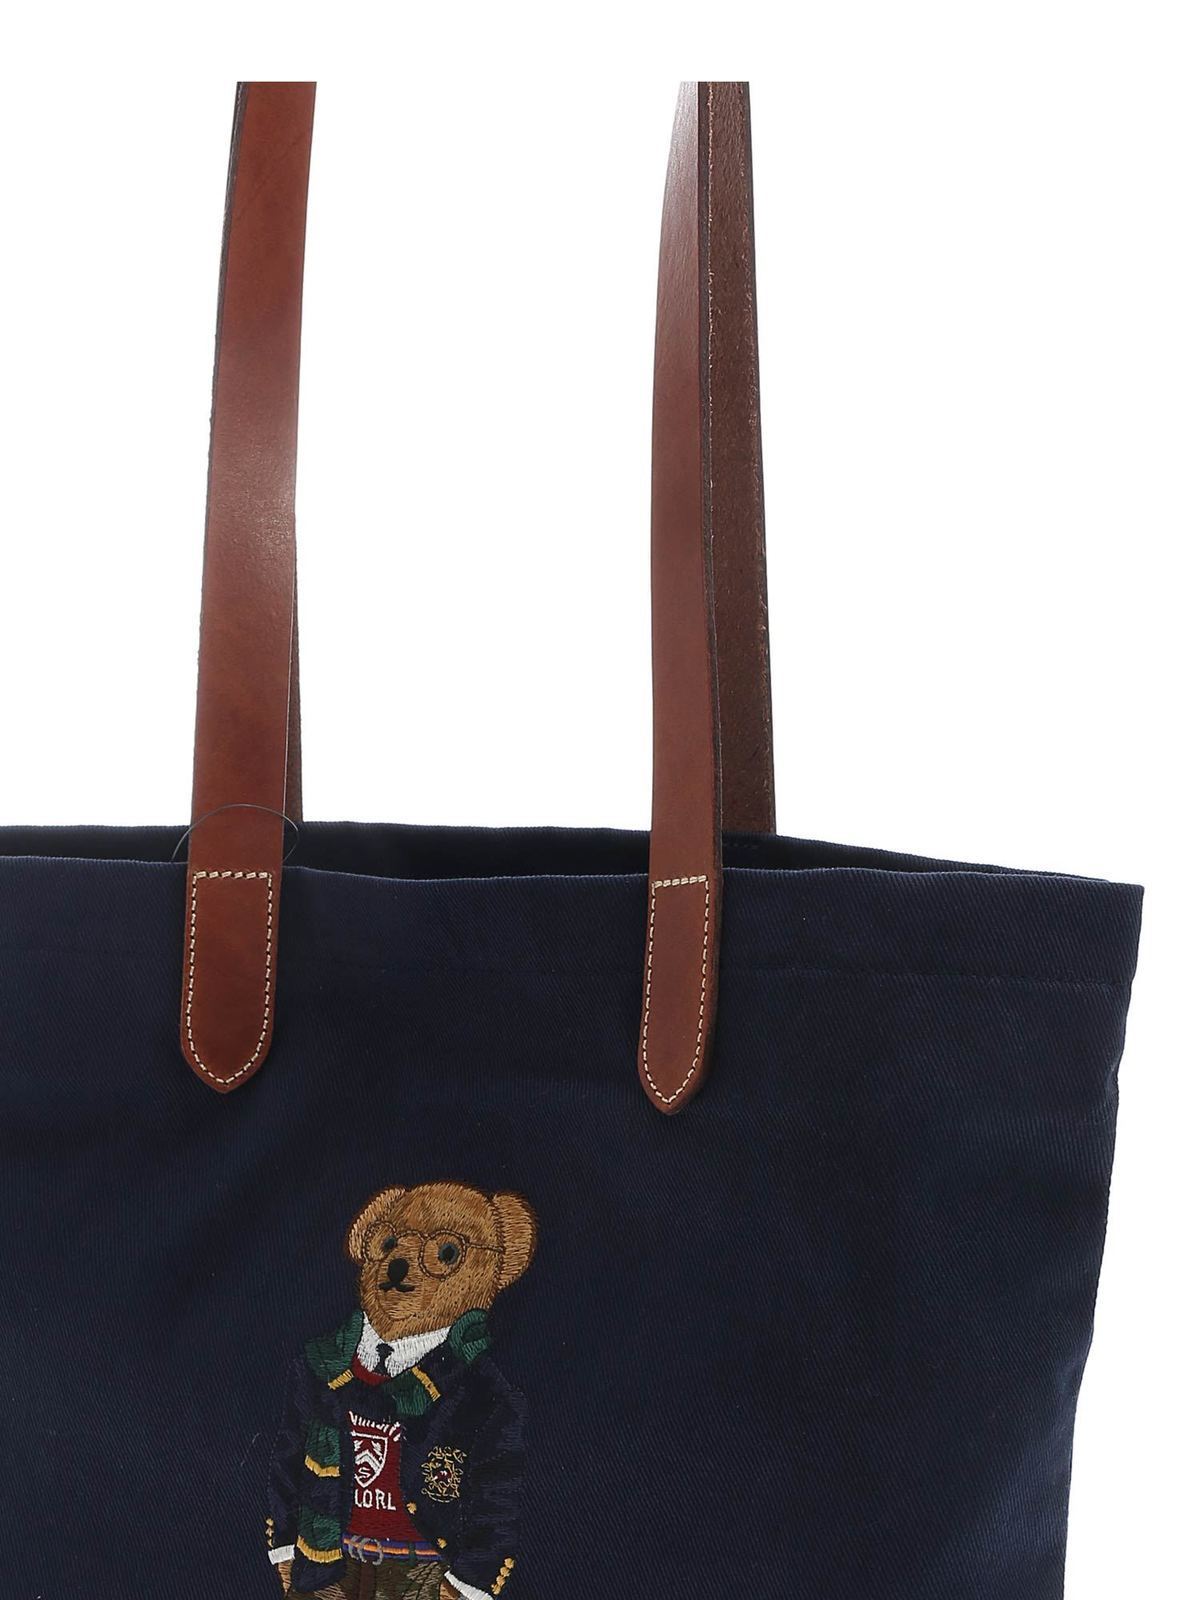 Shoulder bags Polo Ralph Lauren - Polo Bear embroidery tote bag in blue -  405819539001